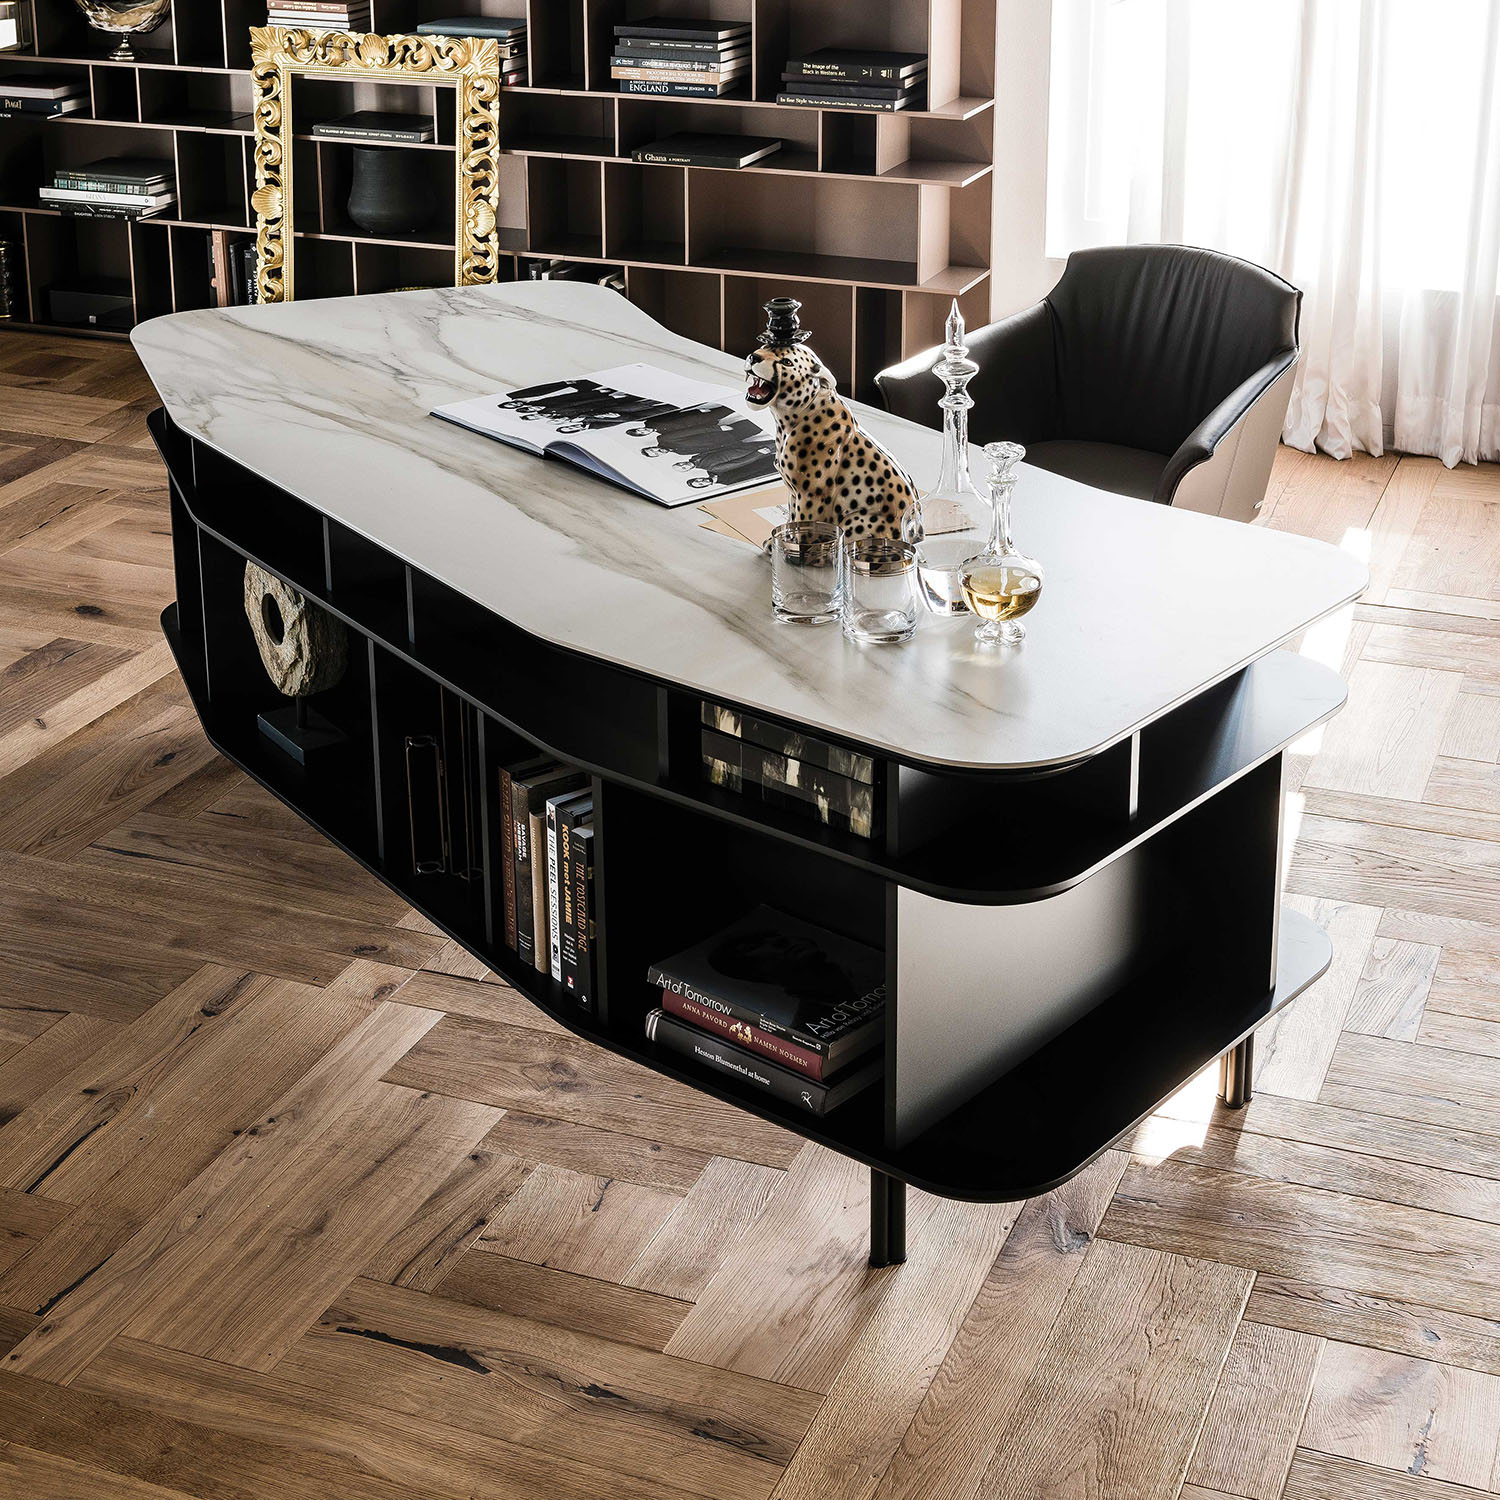 Modern Luxury Home Office Desk Stone Top Table Computer Executive Study Desk